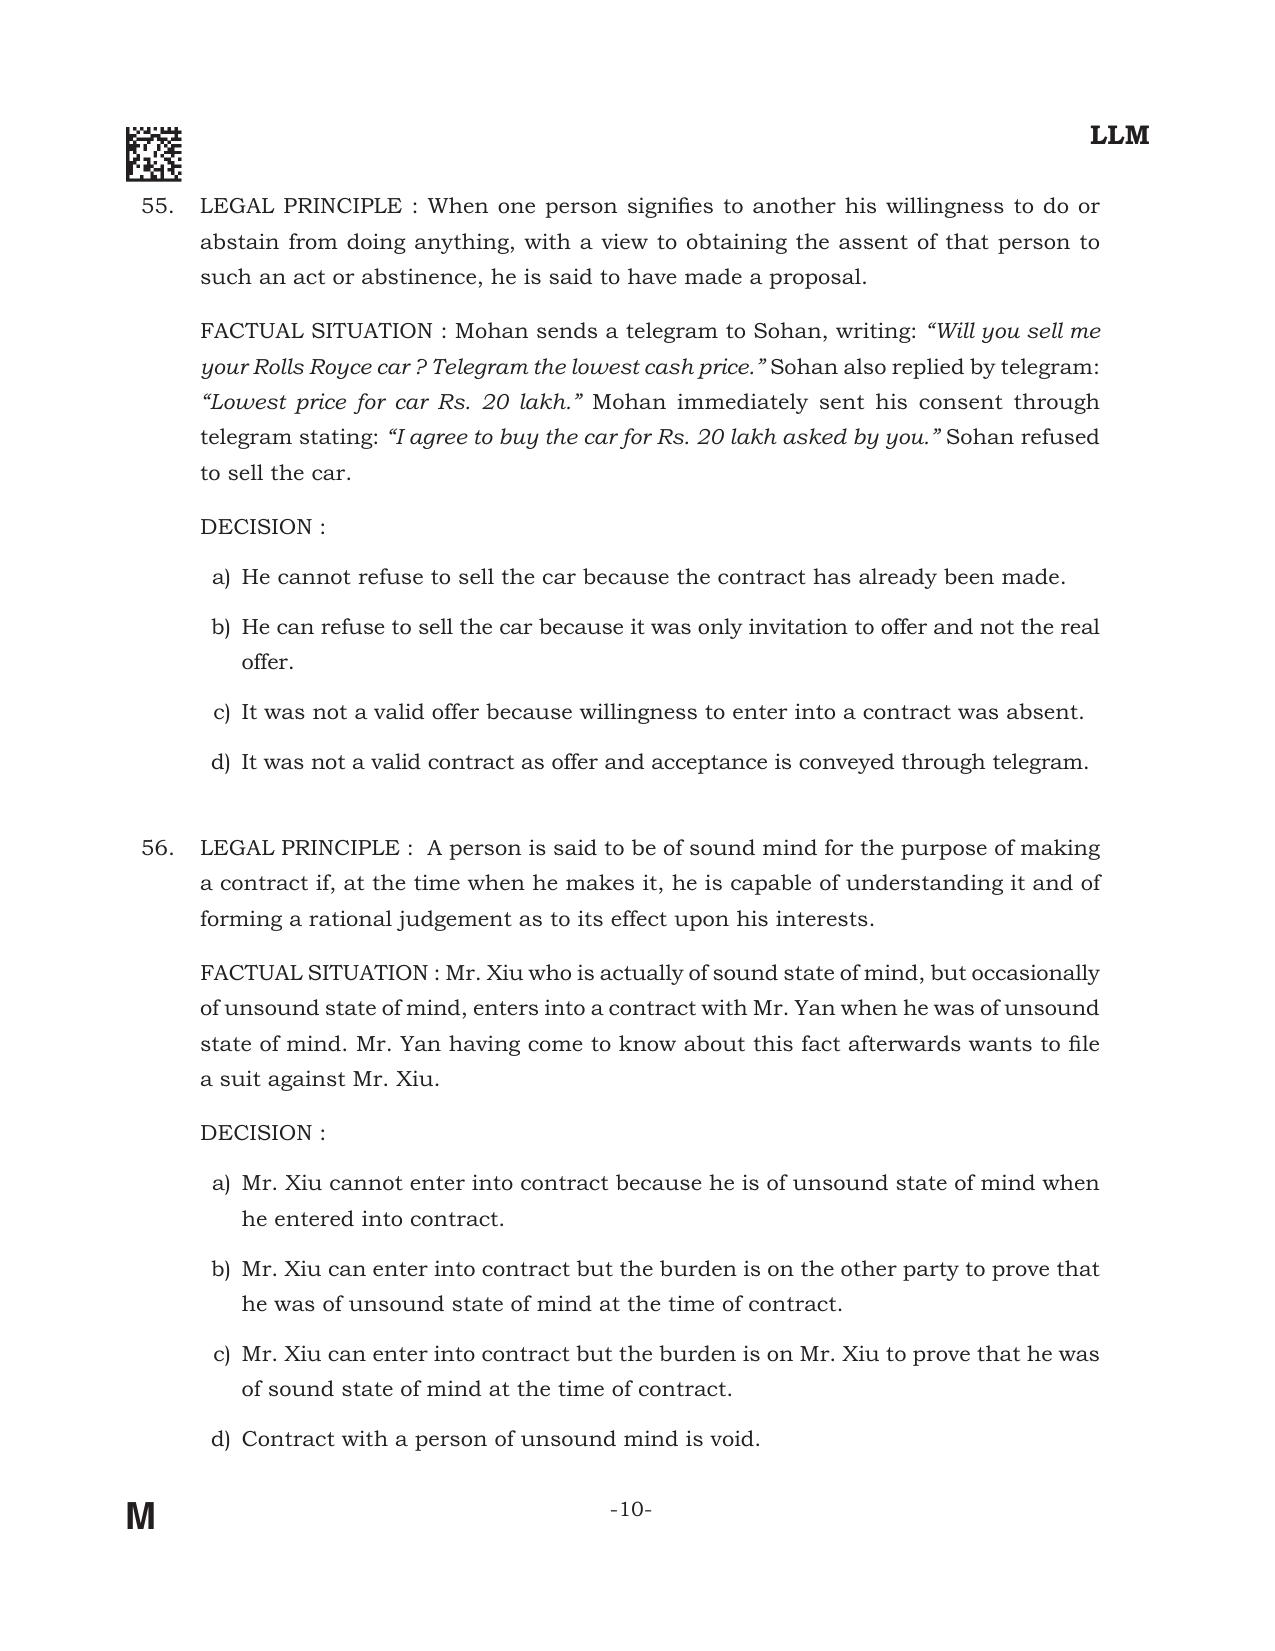 AILET 2022 Question Paper for LL.M - Page 10